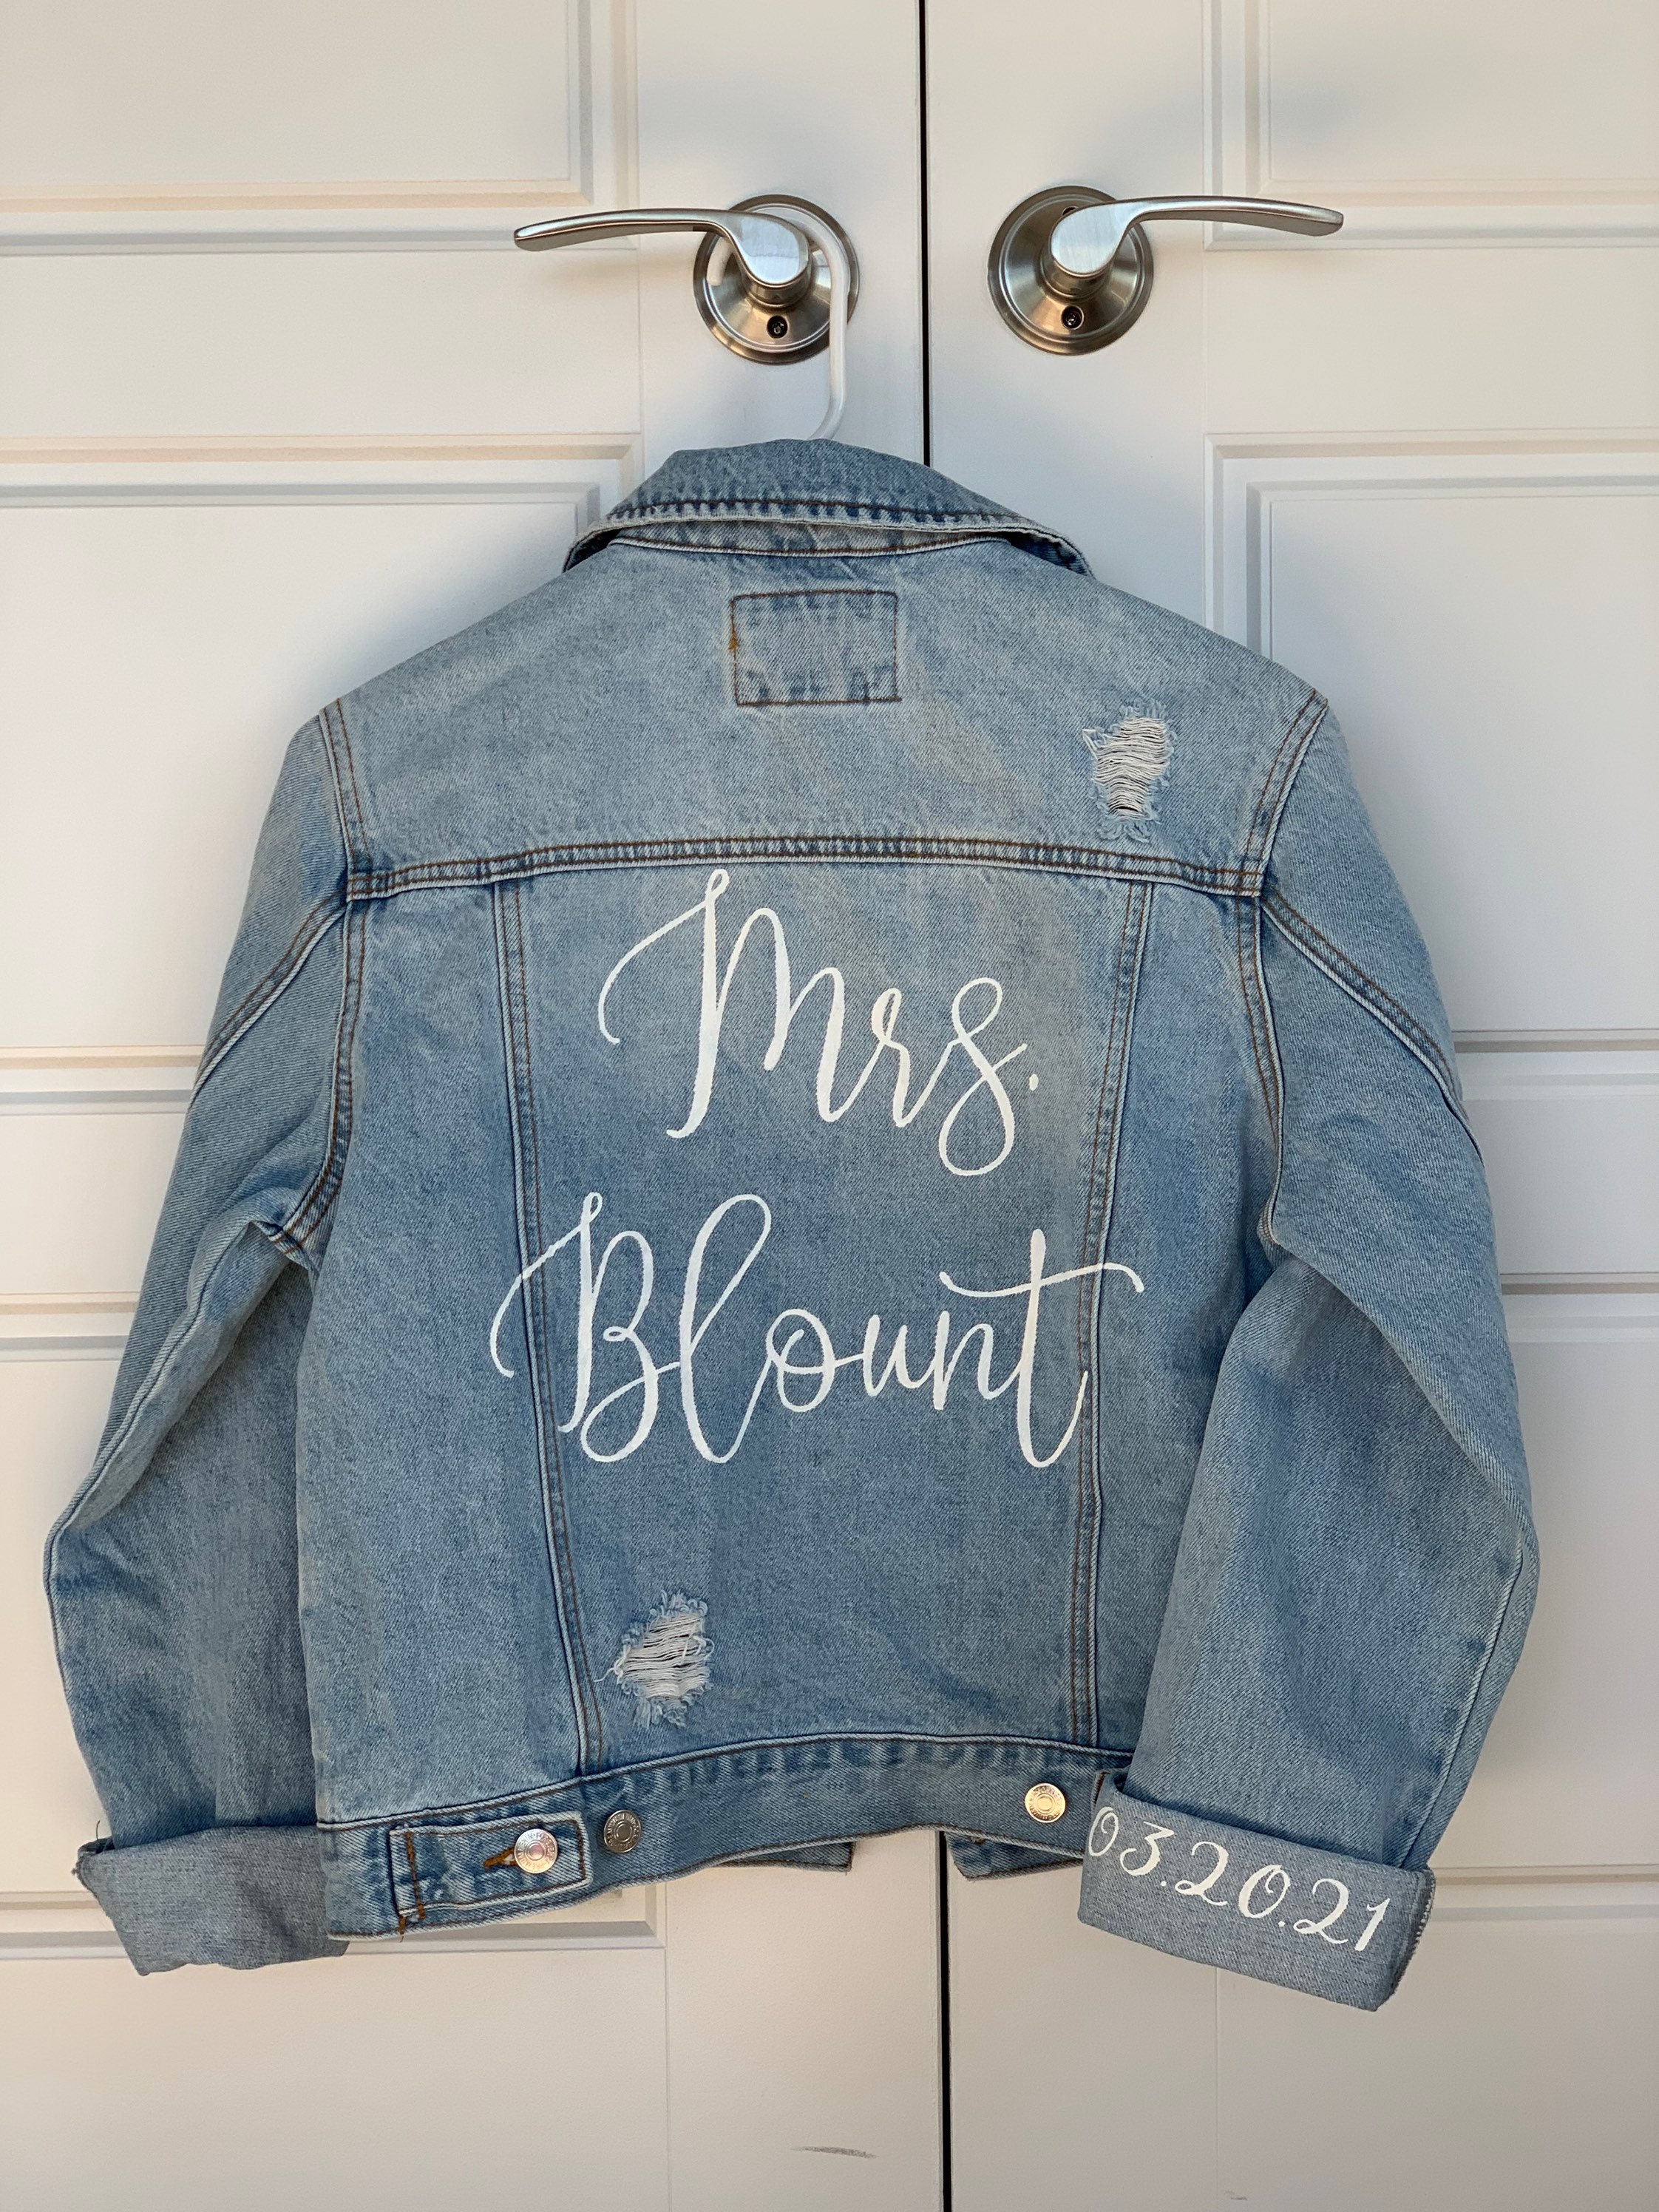 Hand Painted Mrs. Jean Jacket With Wedding Date / MRS. Jean | Etsy